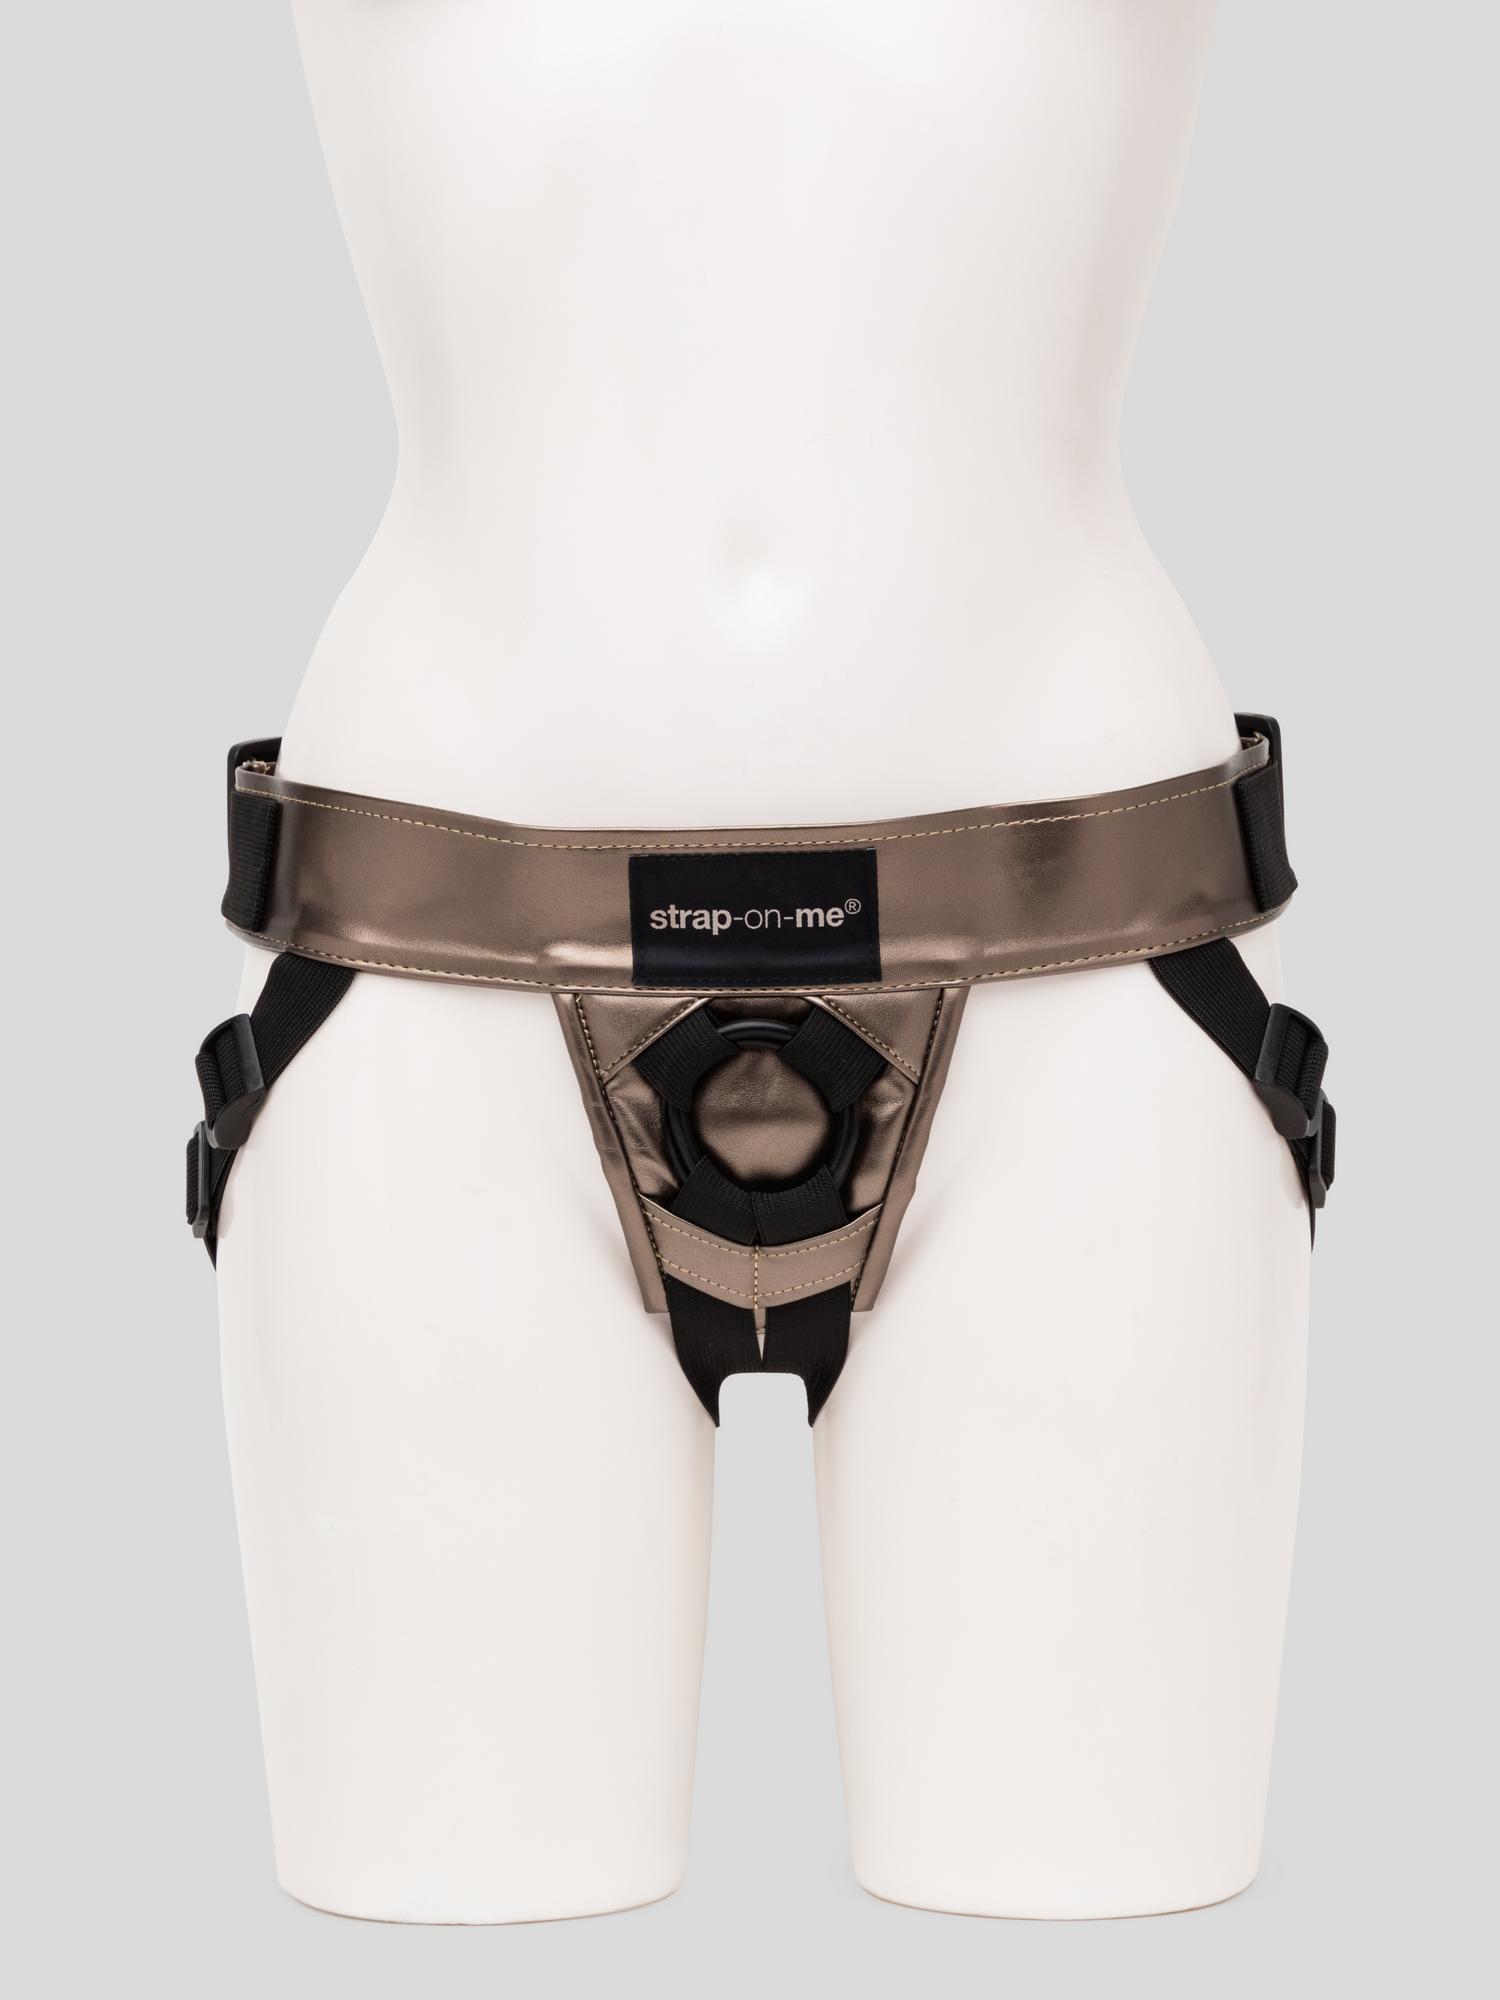 Strap-On-Me Vegan Leather Harness Curious